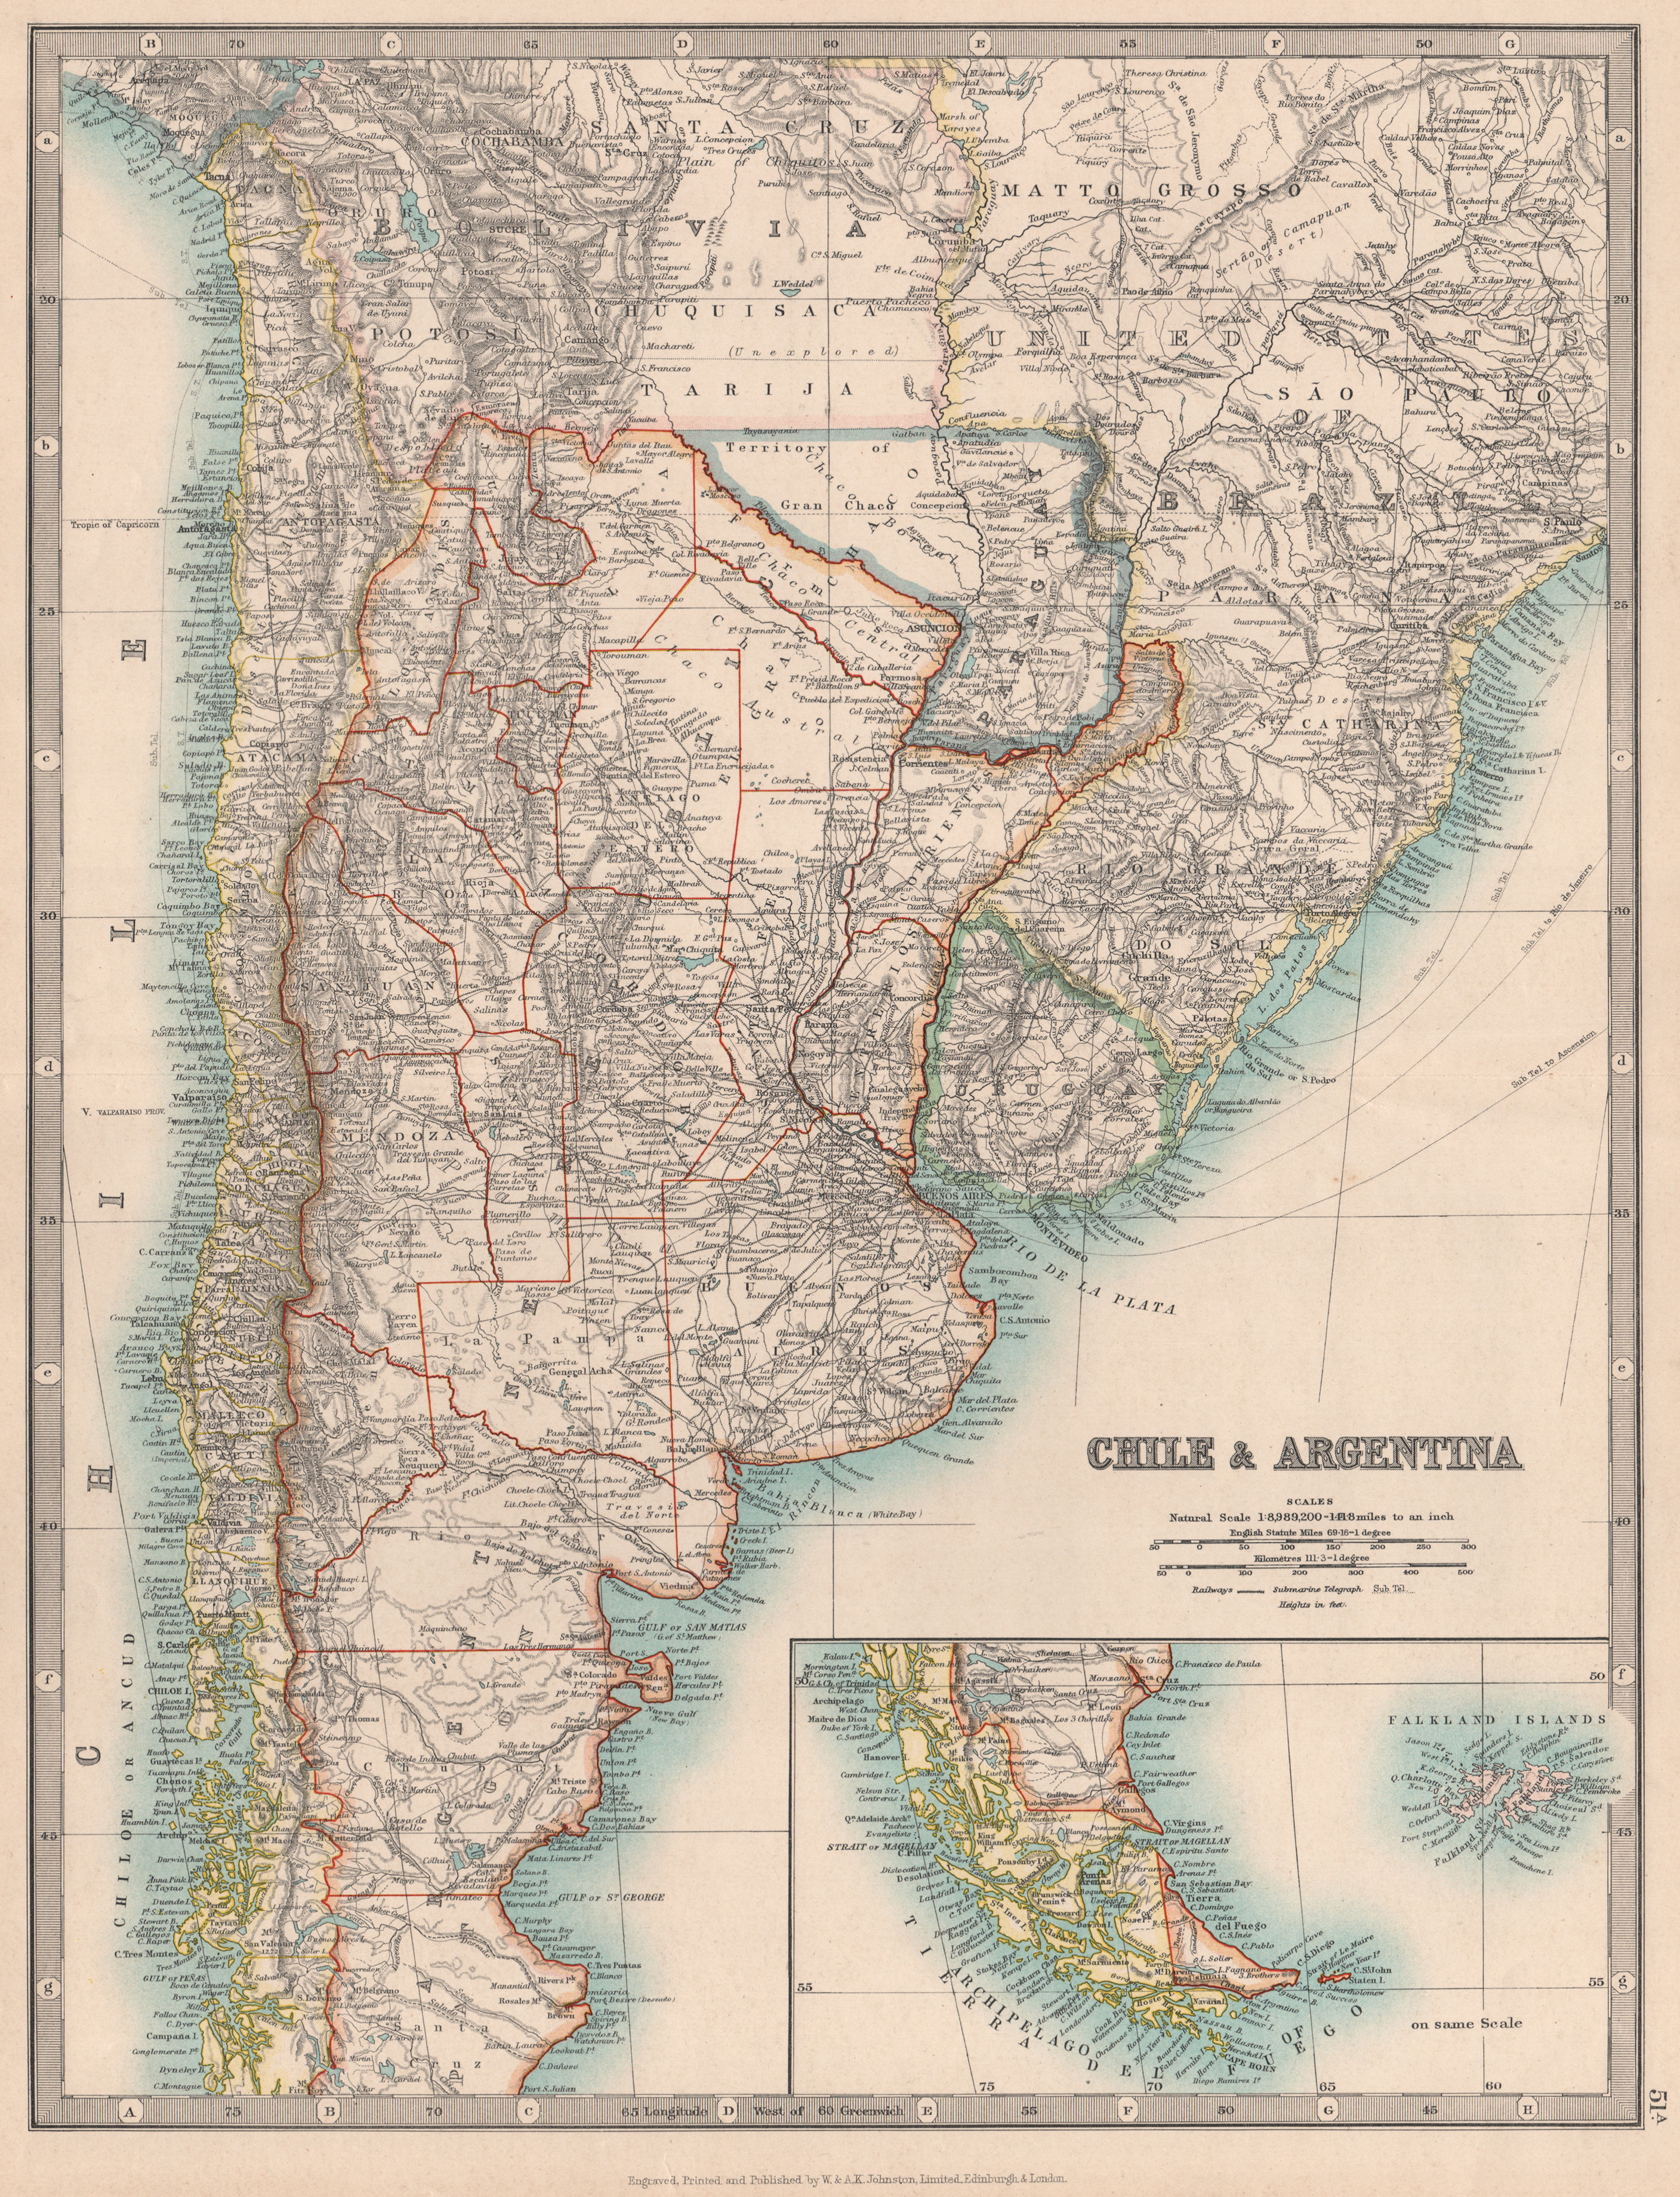 Associate Product CHILE & ARGENTINA. Paraguay including Gran Chaco. Uruguay. JOHNSTON 1912 map